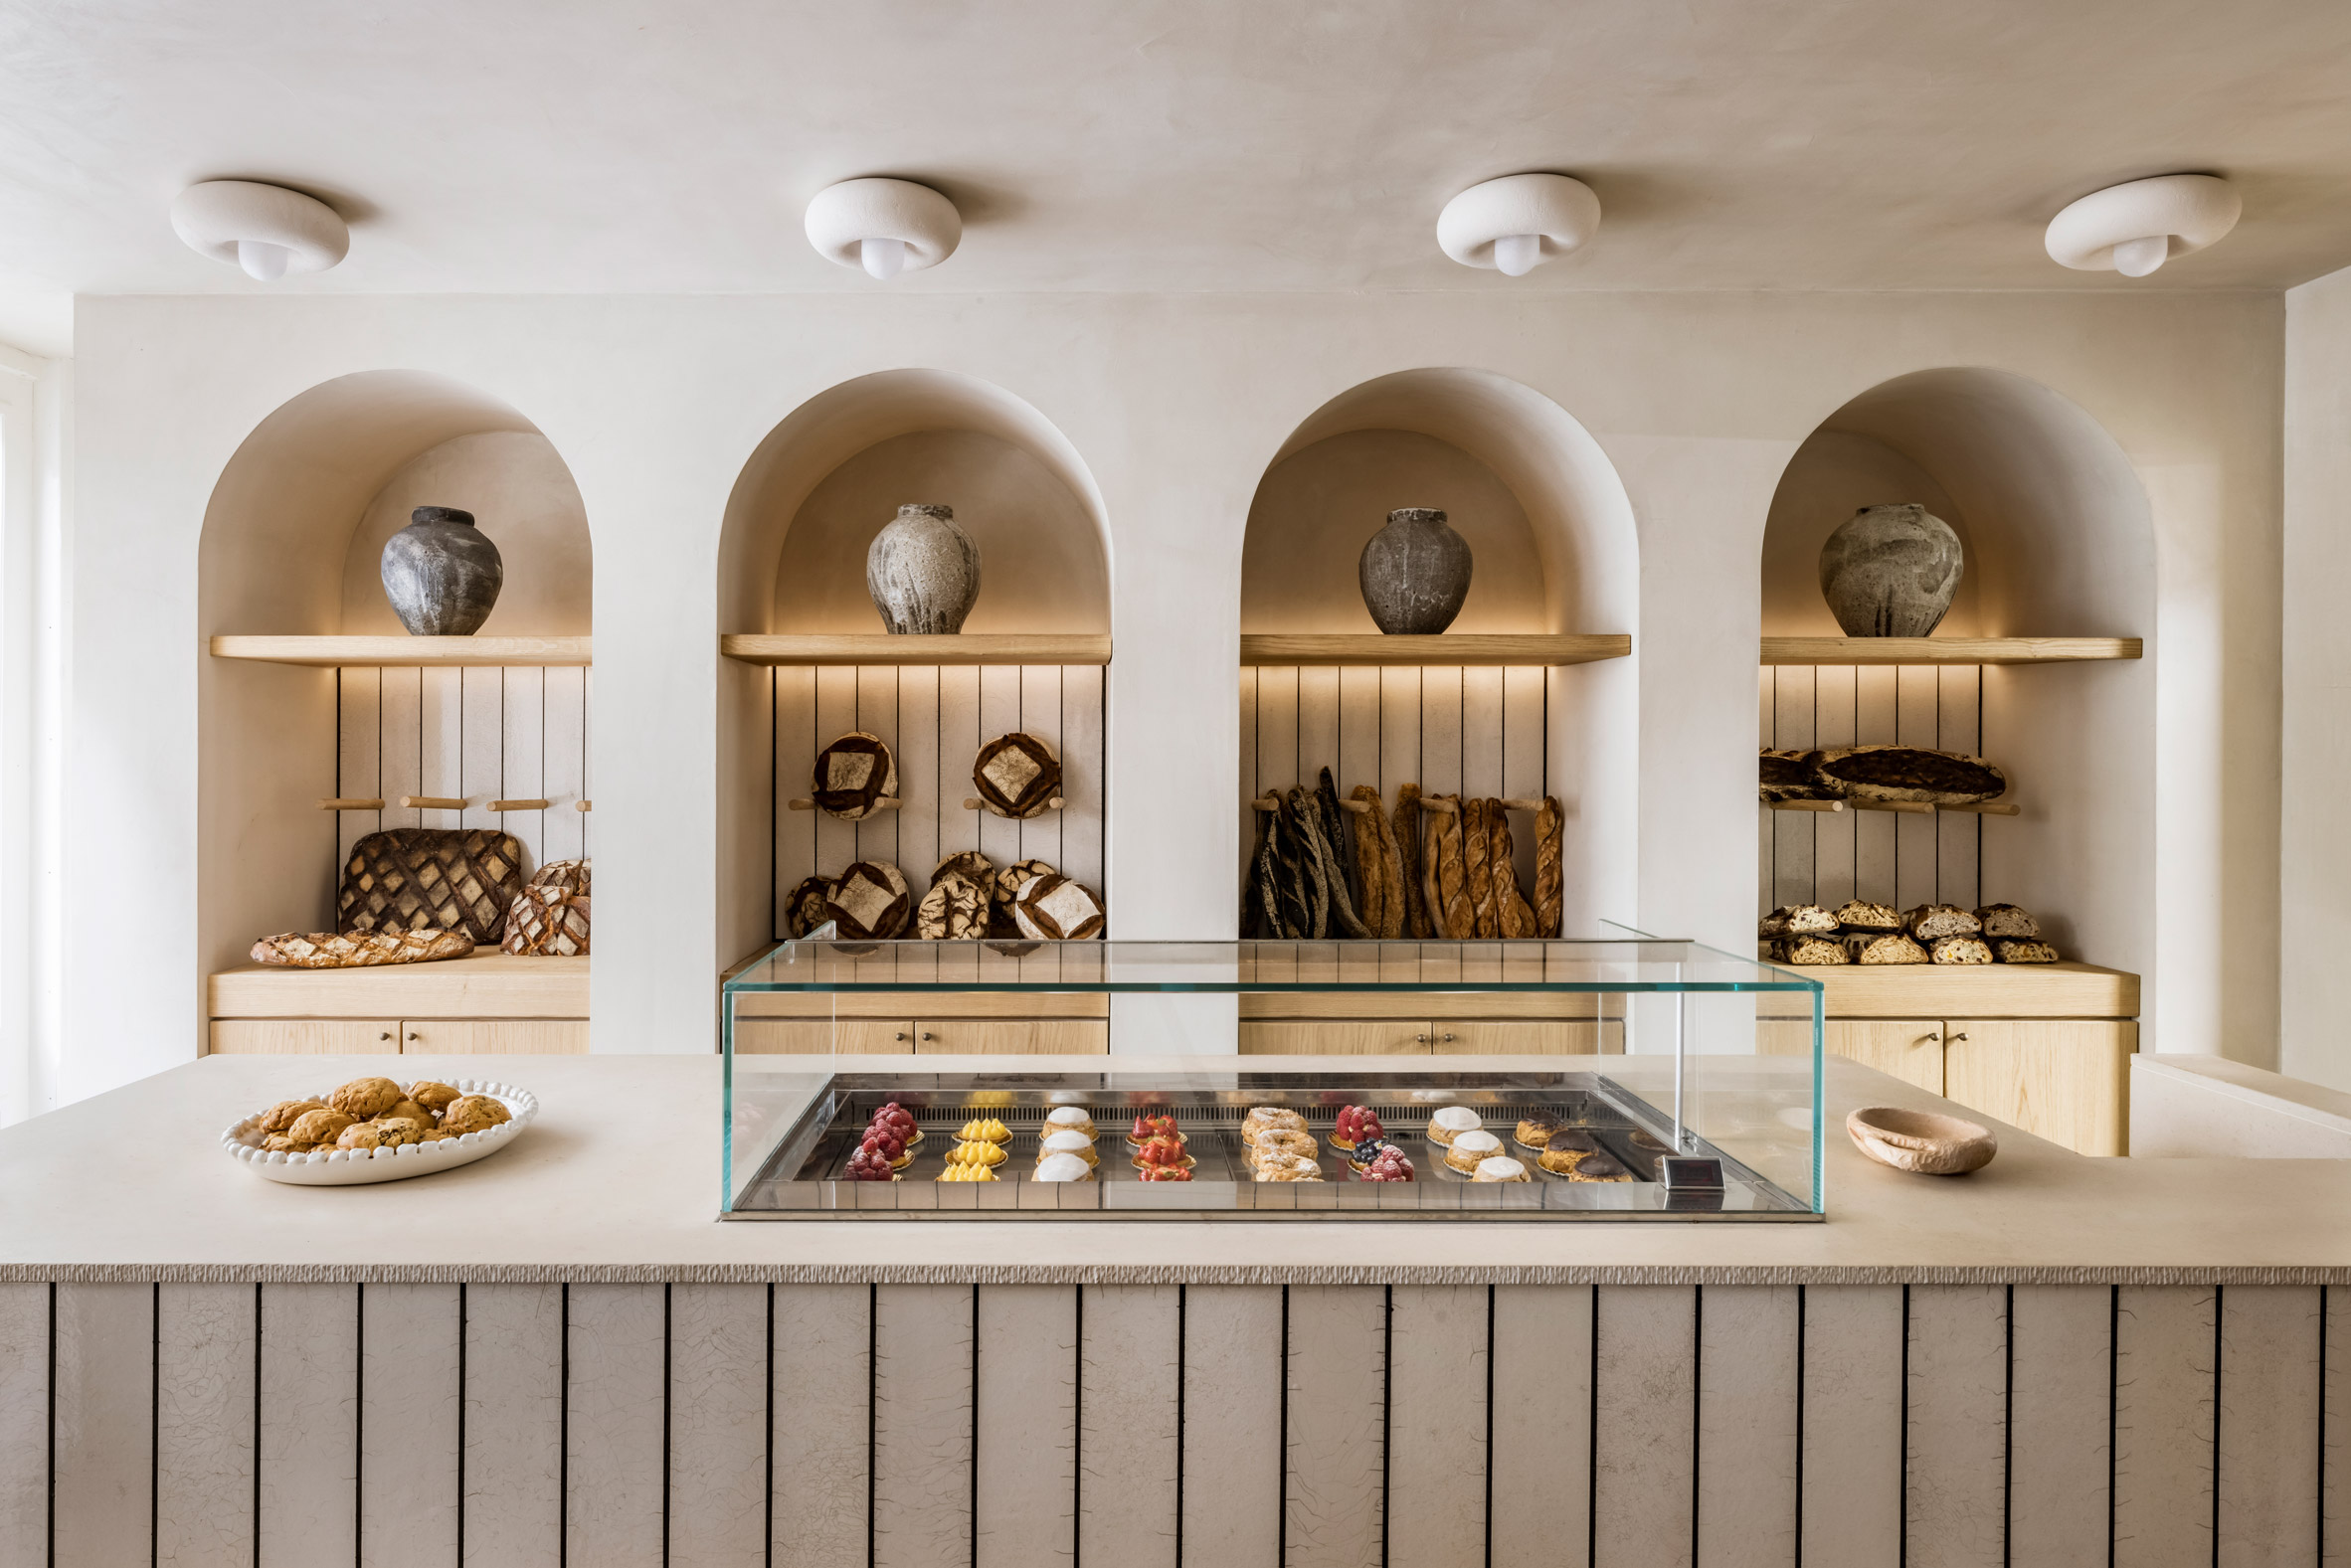 emmanuelle simon designs liberté bakery in paris to be "welcoming"